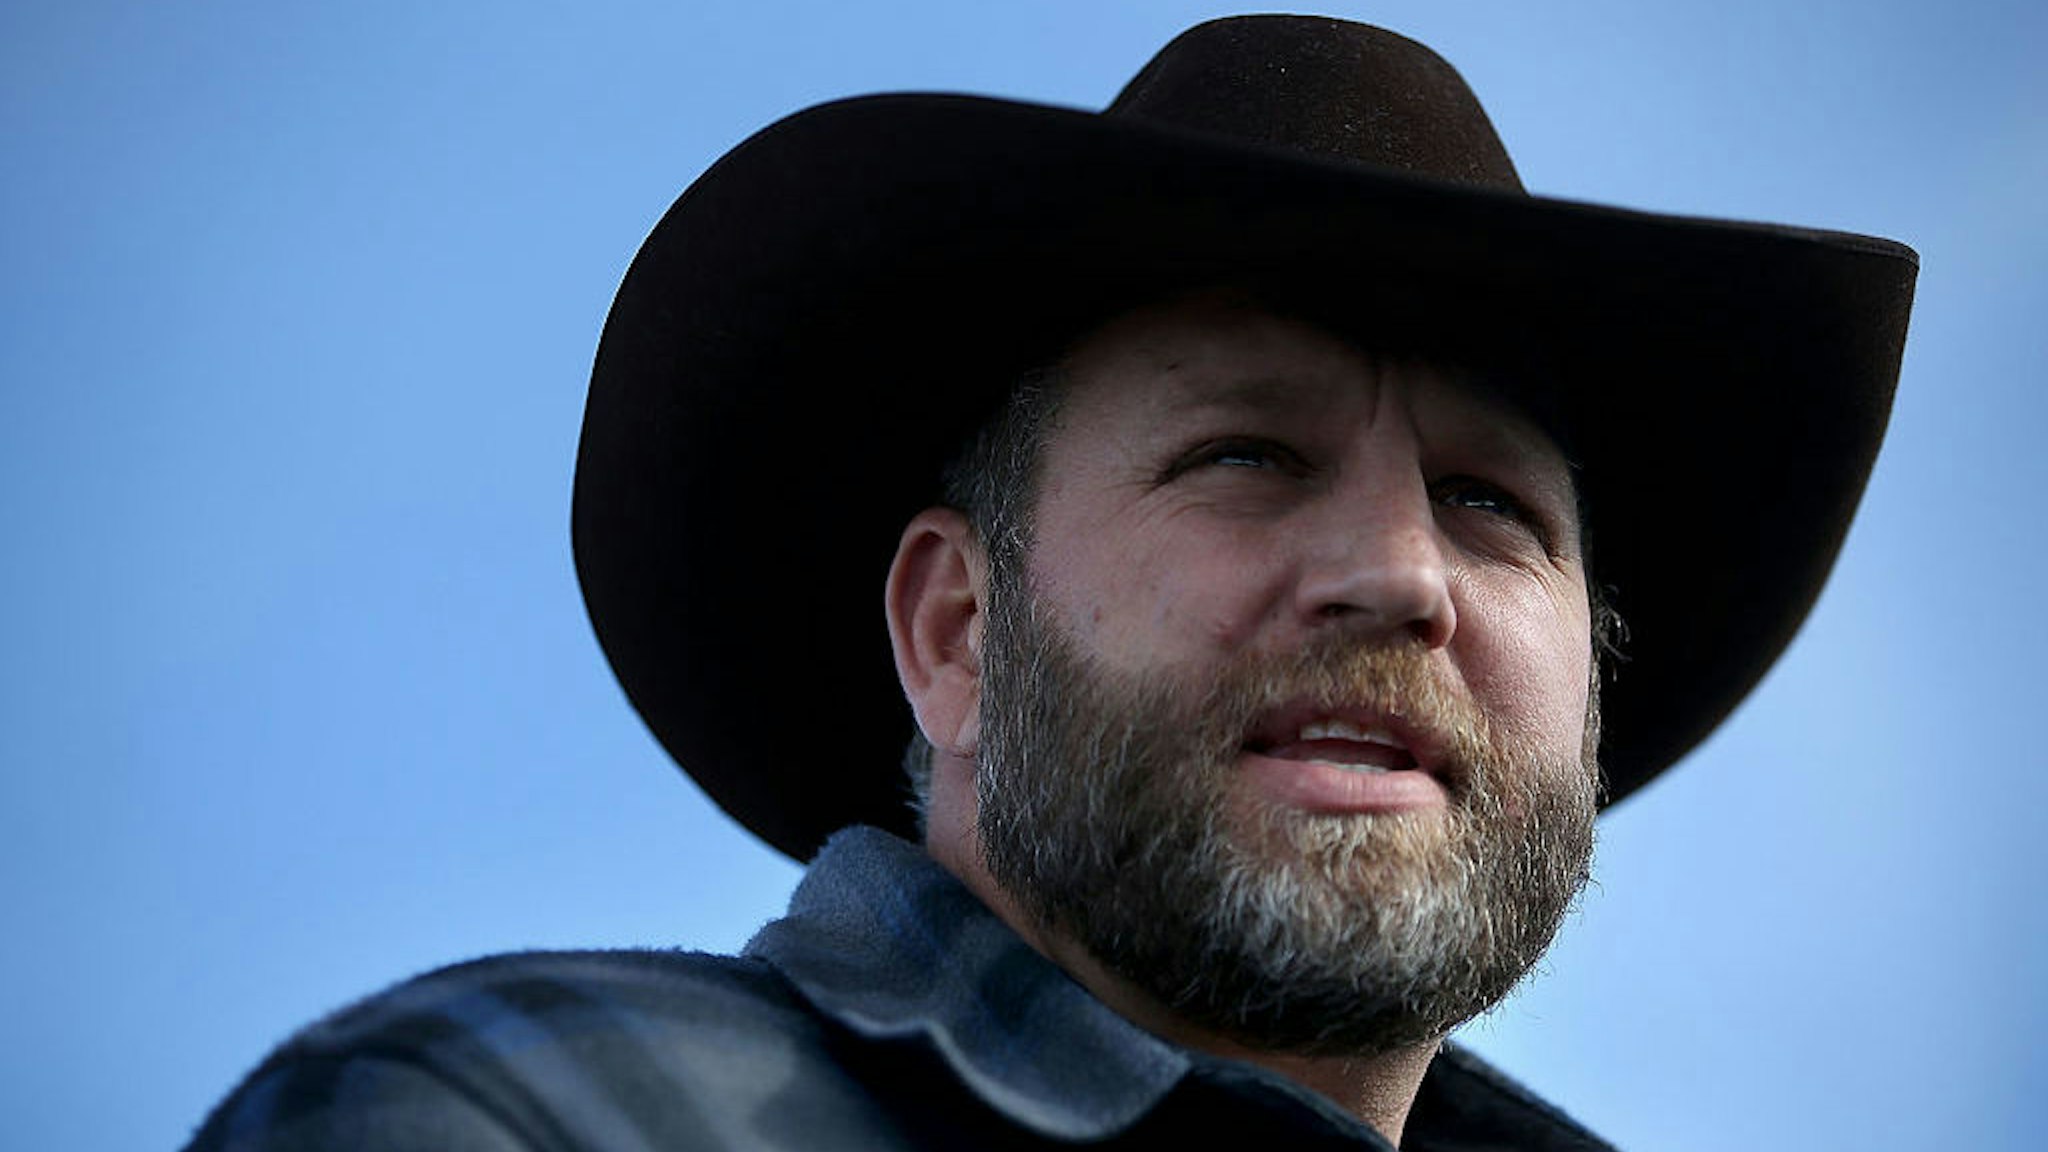 BURNS, OR - JANUARY 06: Ammon Bundy, the leader of an anti-government militia, speaks to members of the media in front of the Malheur National Wildlife Refuge Headquarters on January 6, 2016 near Burns, Oregon. An armed anti-government militia group continues to occupy the Malheur National Wildlife Headquarters as they protest the jailing of two ranchers for arson. (Photo by Justin Sullivan/Getty Images)